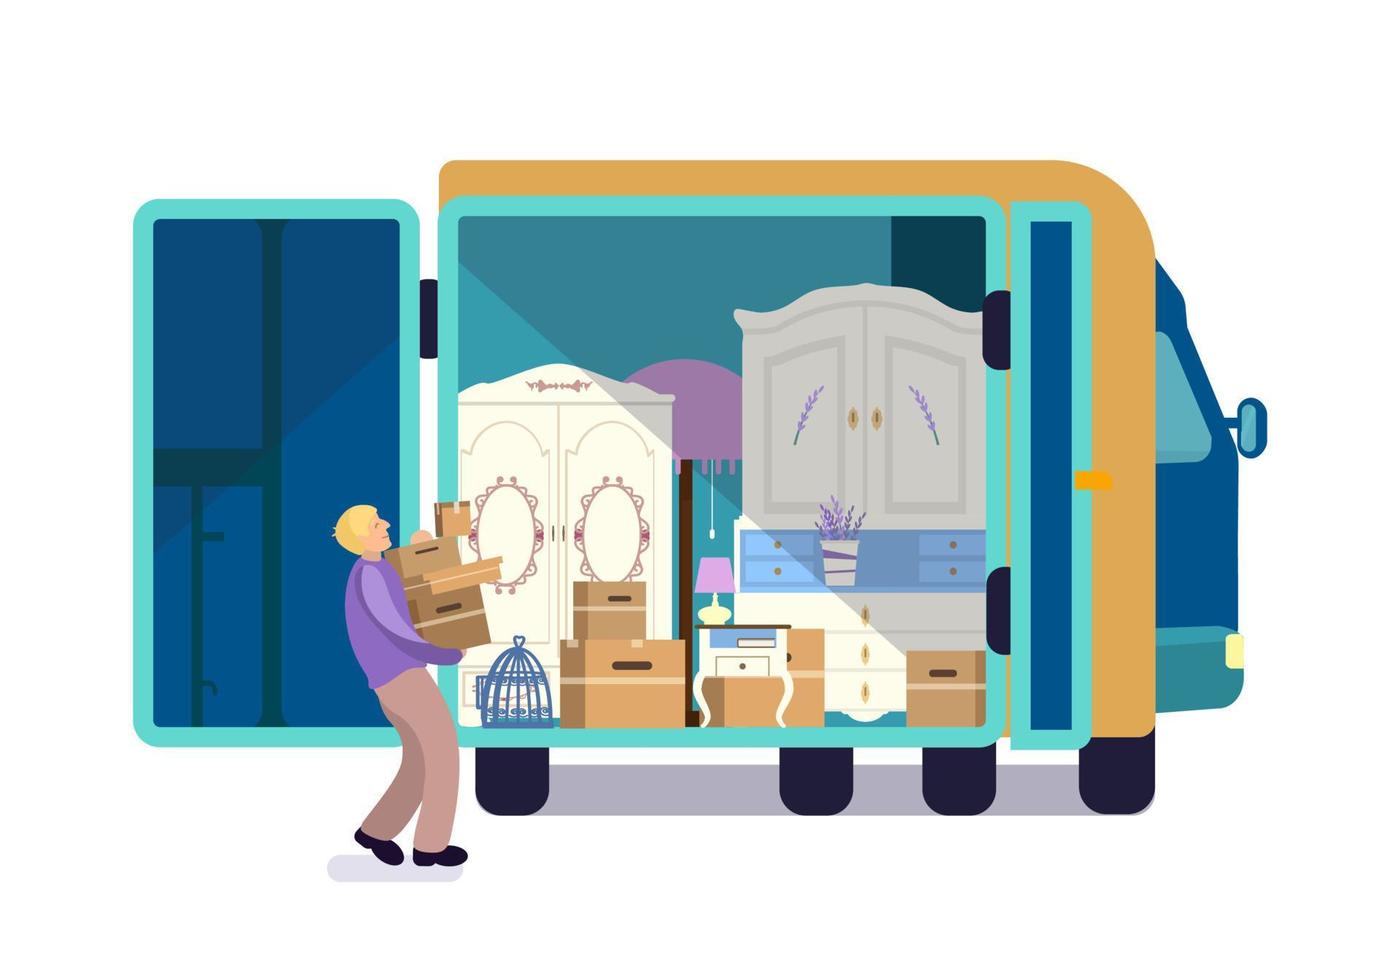 Man carrying boxes to moving truck full of furniture and boxes. Inside moving truck. Flat vector illustration.